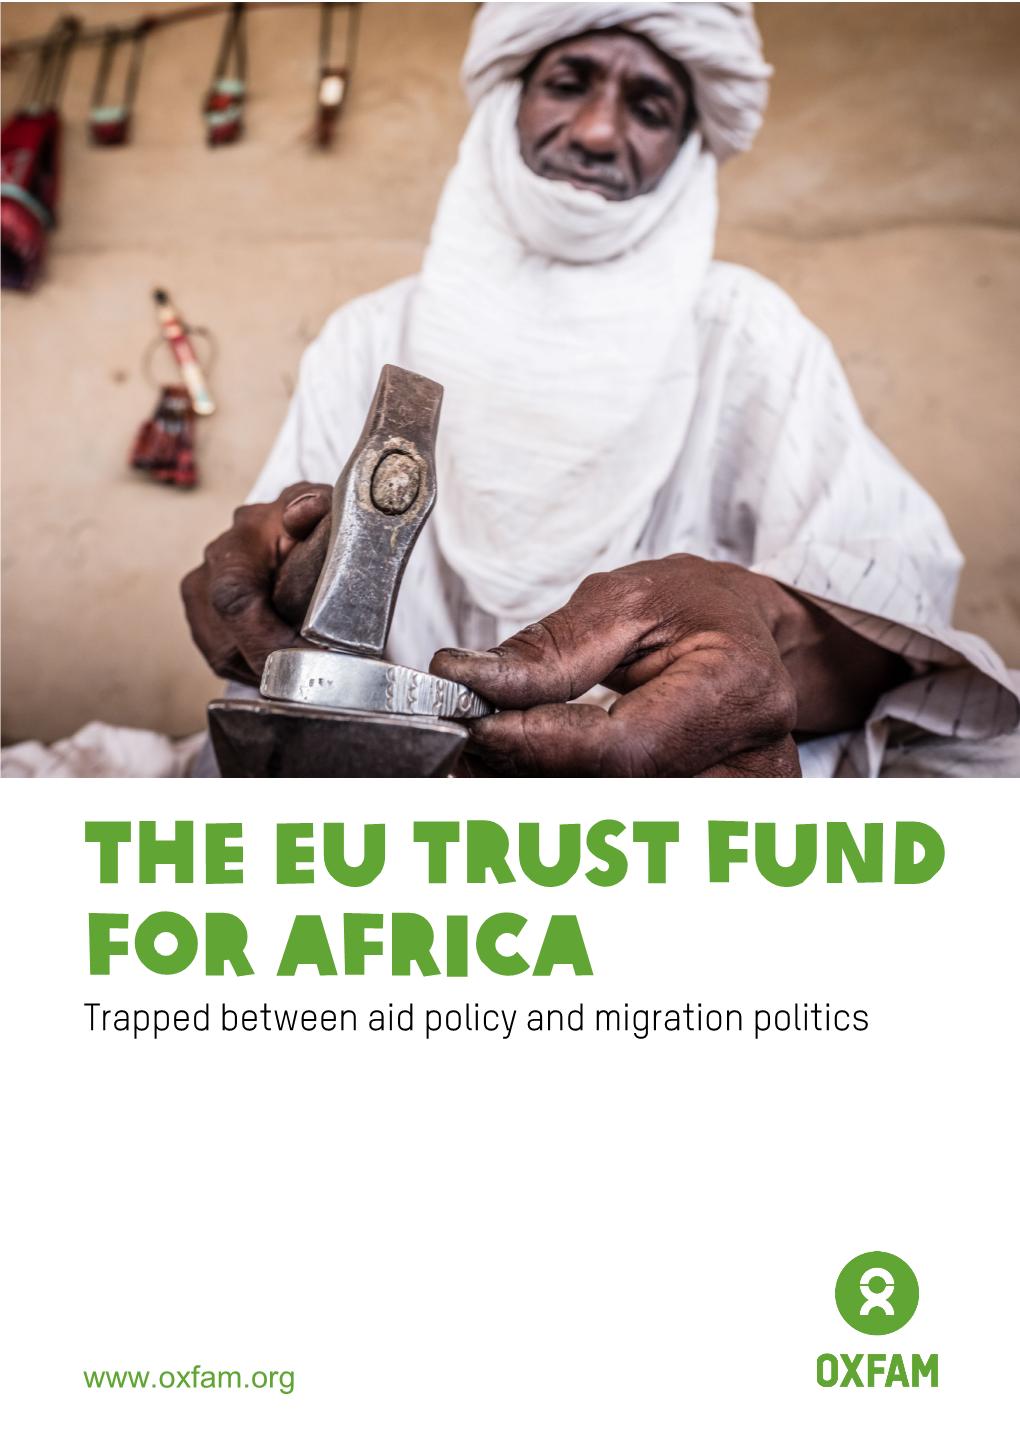 The EU Trust Fund for Africa Trapped Between Aid Policy and Migration Politics